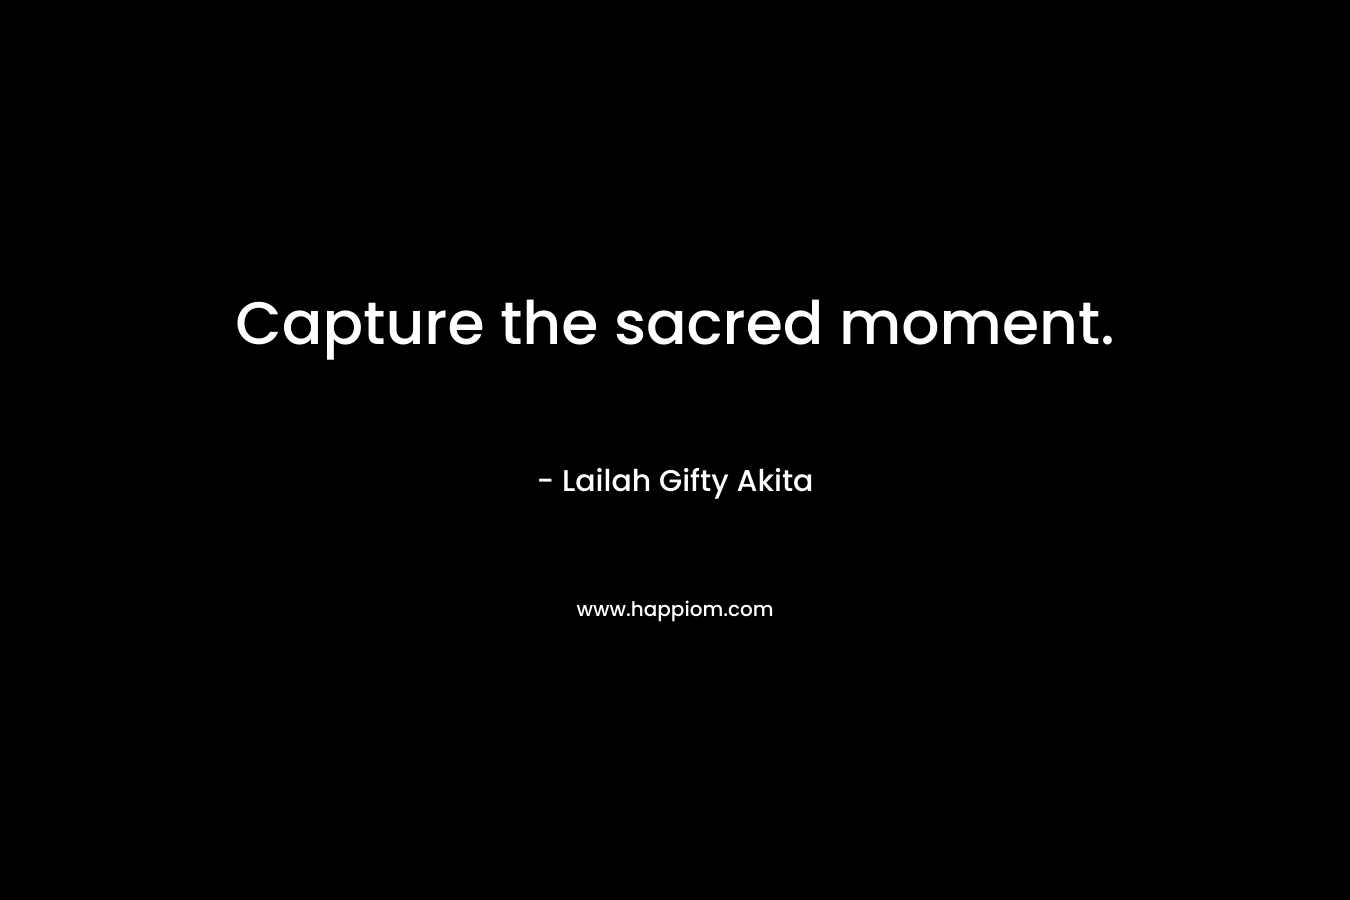 Capture the sacred moment.